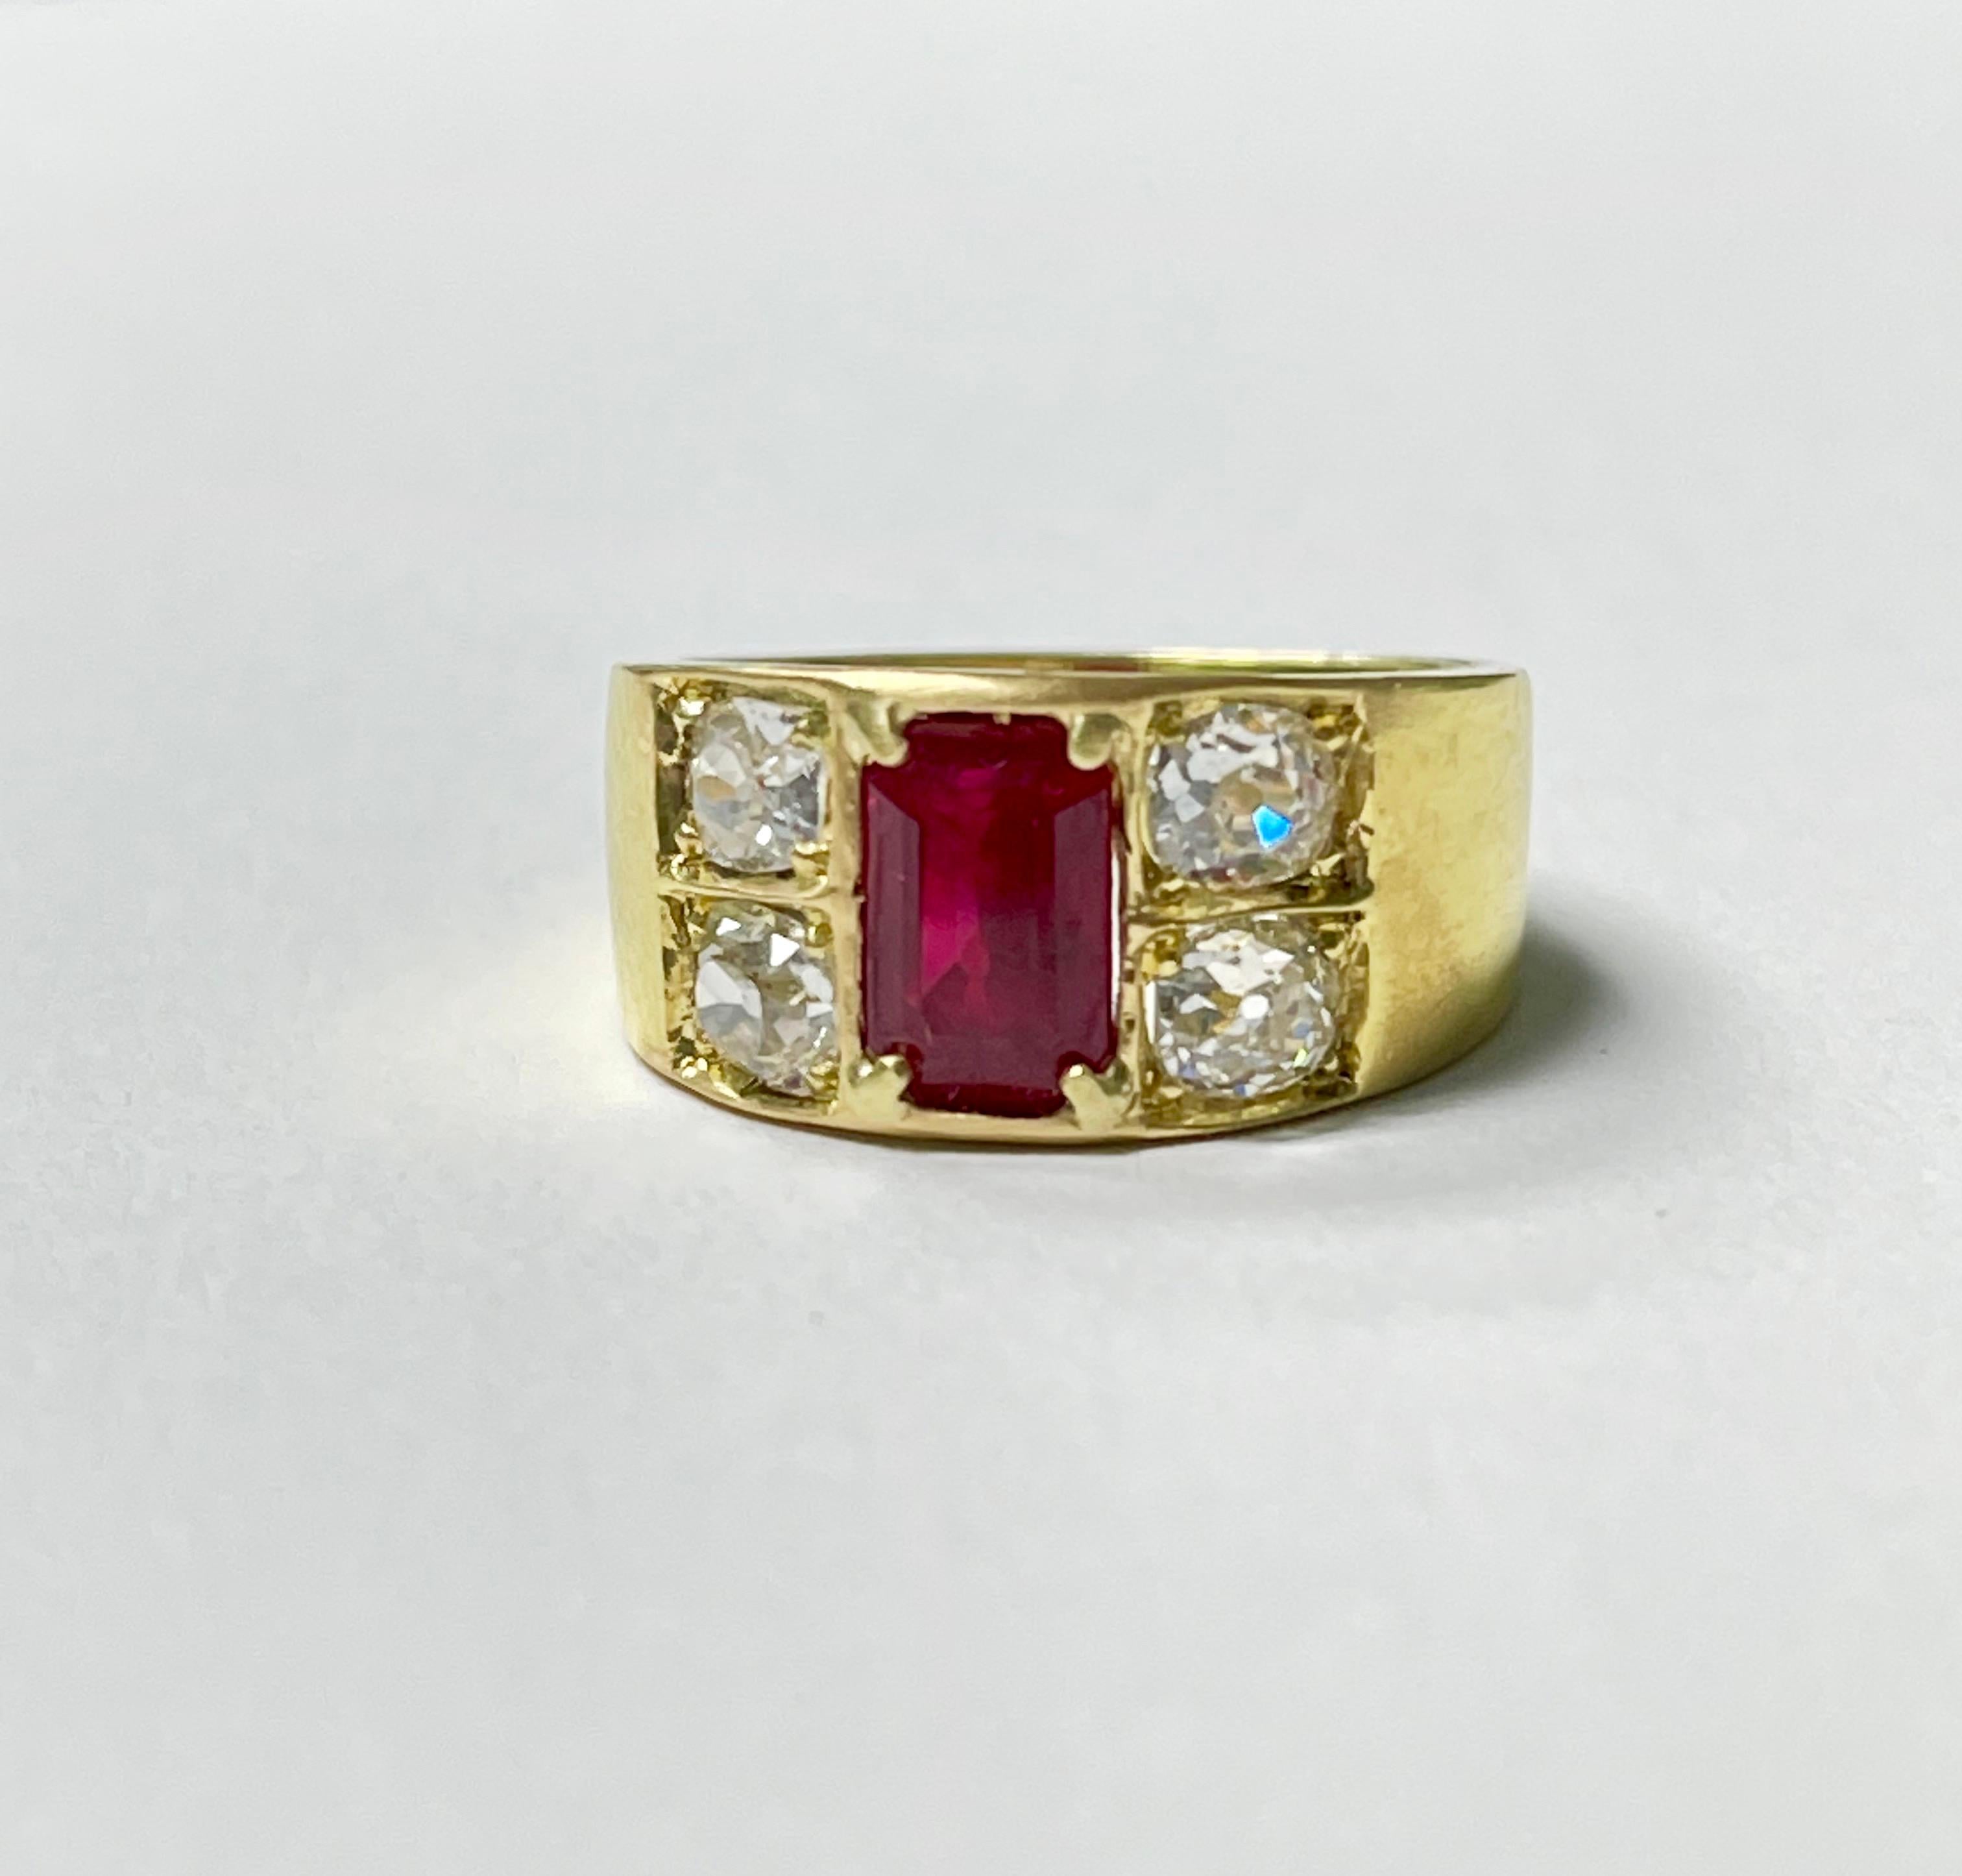 Unique AGL certified burma Heated emerald cut ruby and diamond ring handcrafted in 18k yellow gold. 
The details are as follows : 
Emerald cut Ruby weight : 2.06 carat
Diamond weight : 1.70 carat / 4 old cut diamonds with F color and VS clarity